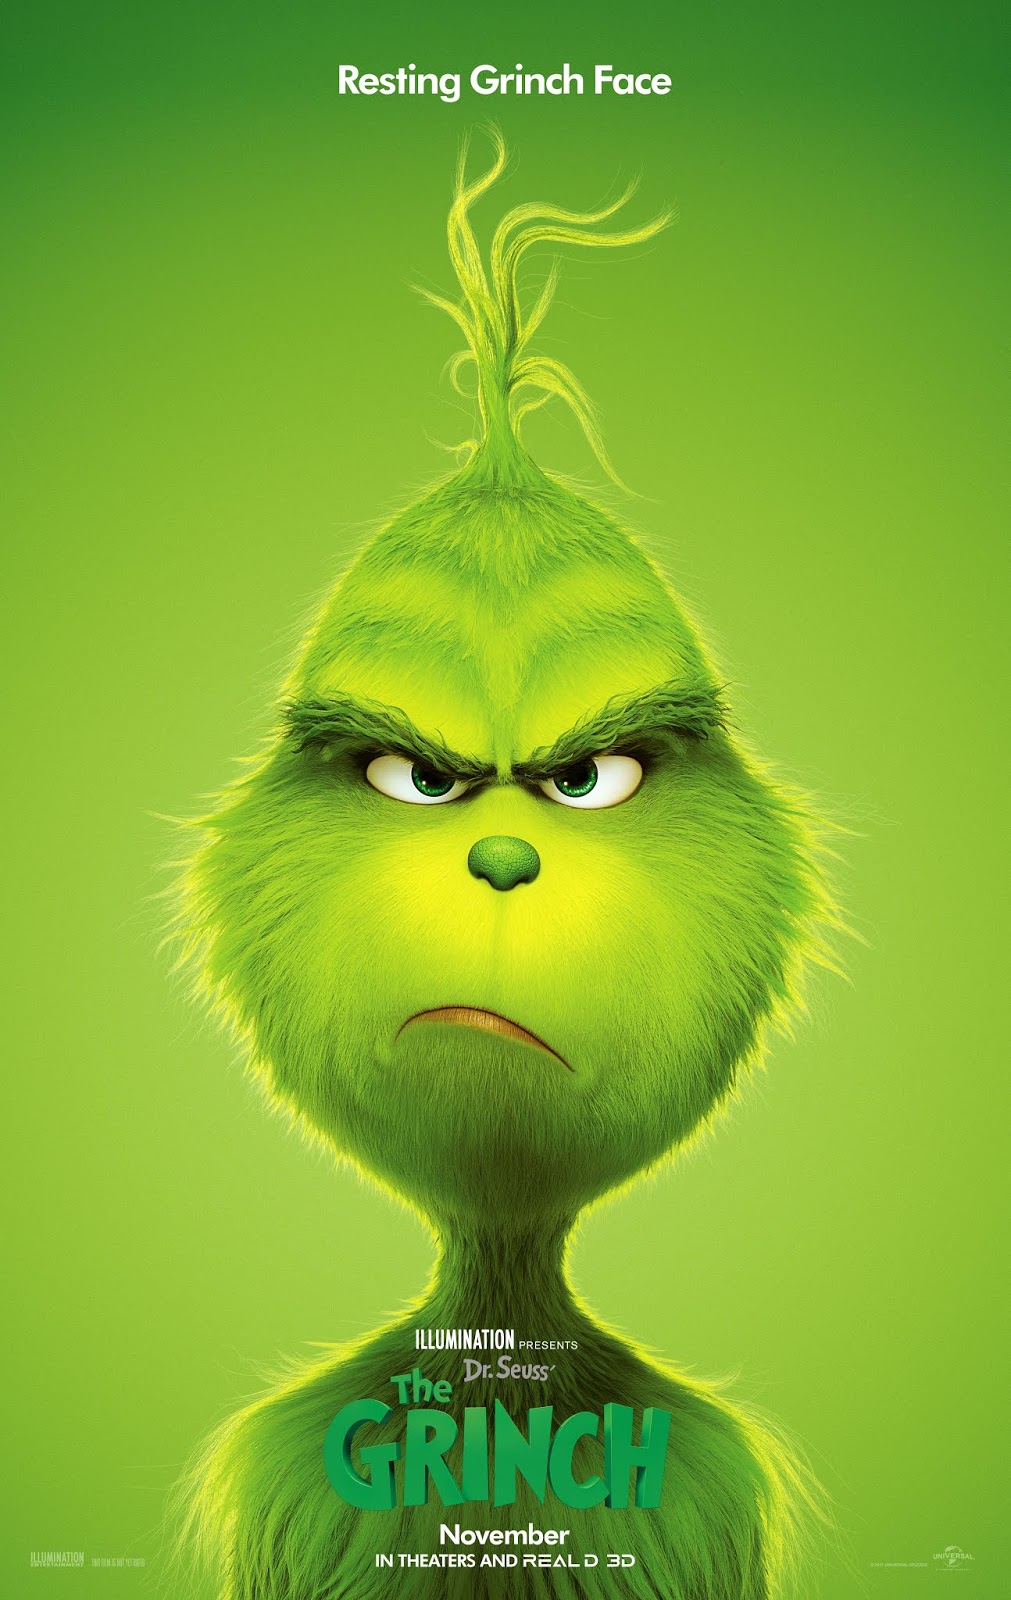 Green hairy grinch in a grumpy mood in front of a green background